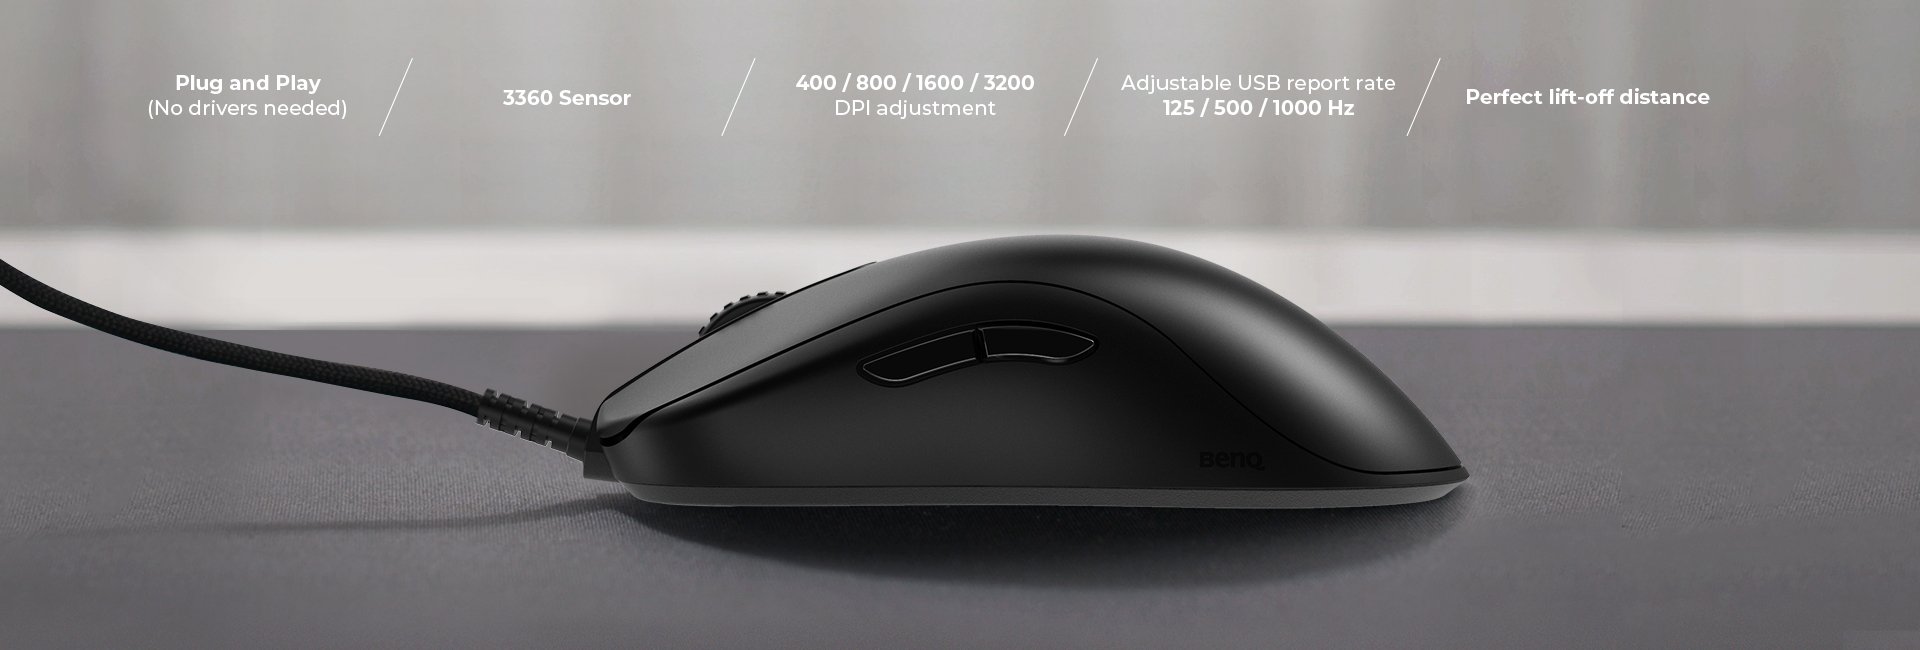 zowie-esports-gaming-mouse-fk2-c-plug-and-play-3360-sensor-dpi-adjustment-adjustable-usb-report-rate-perfect-lift-off-distance